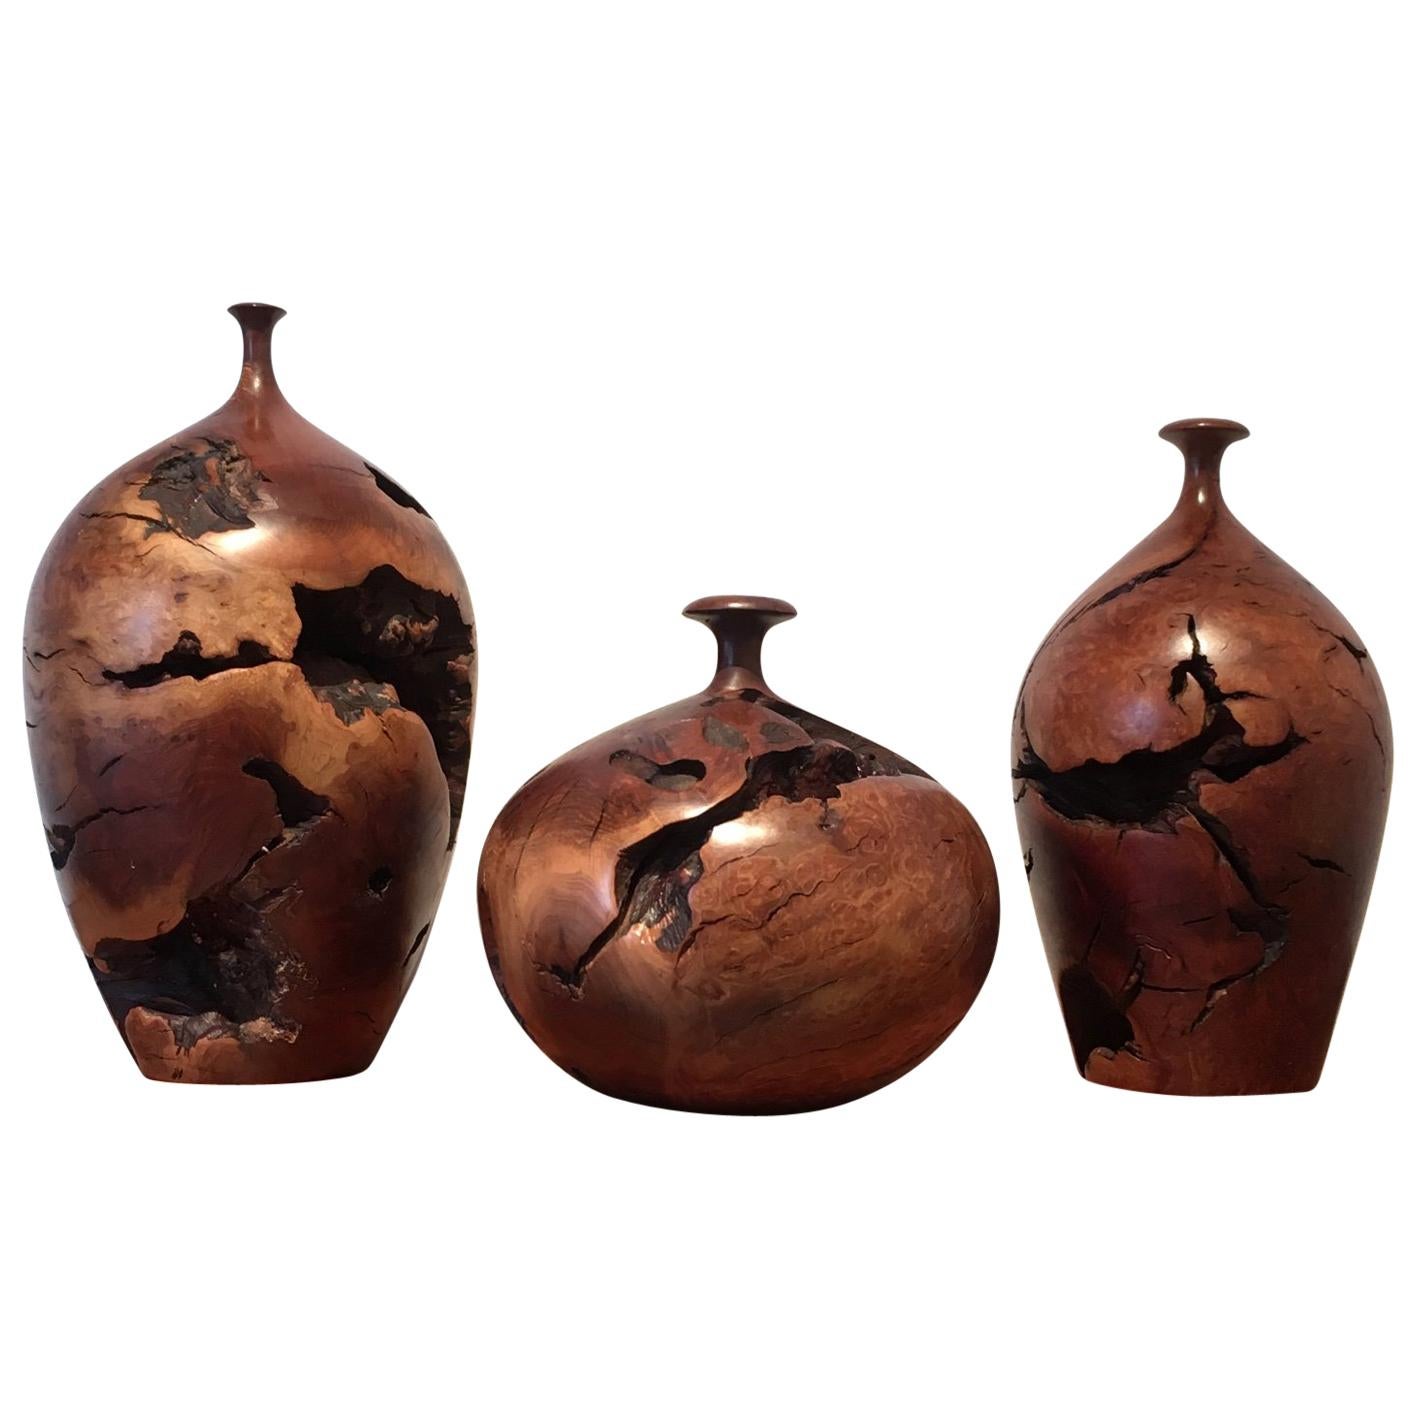 Set of 3 Turned Burl Wood Vessels by Hap Sakwa Signed and Dated